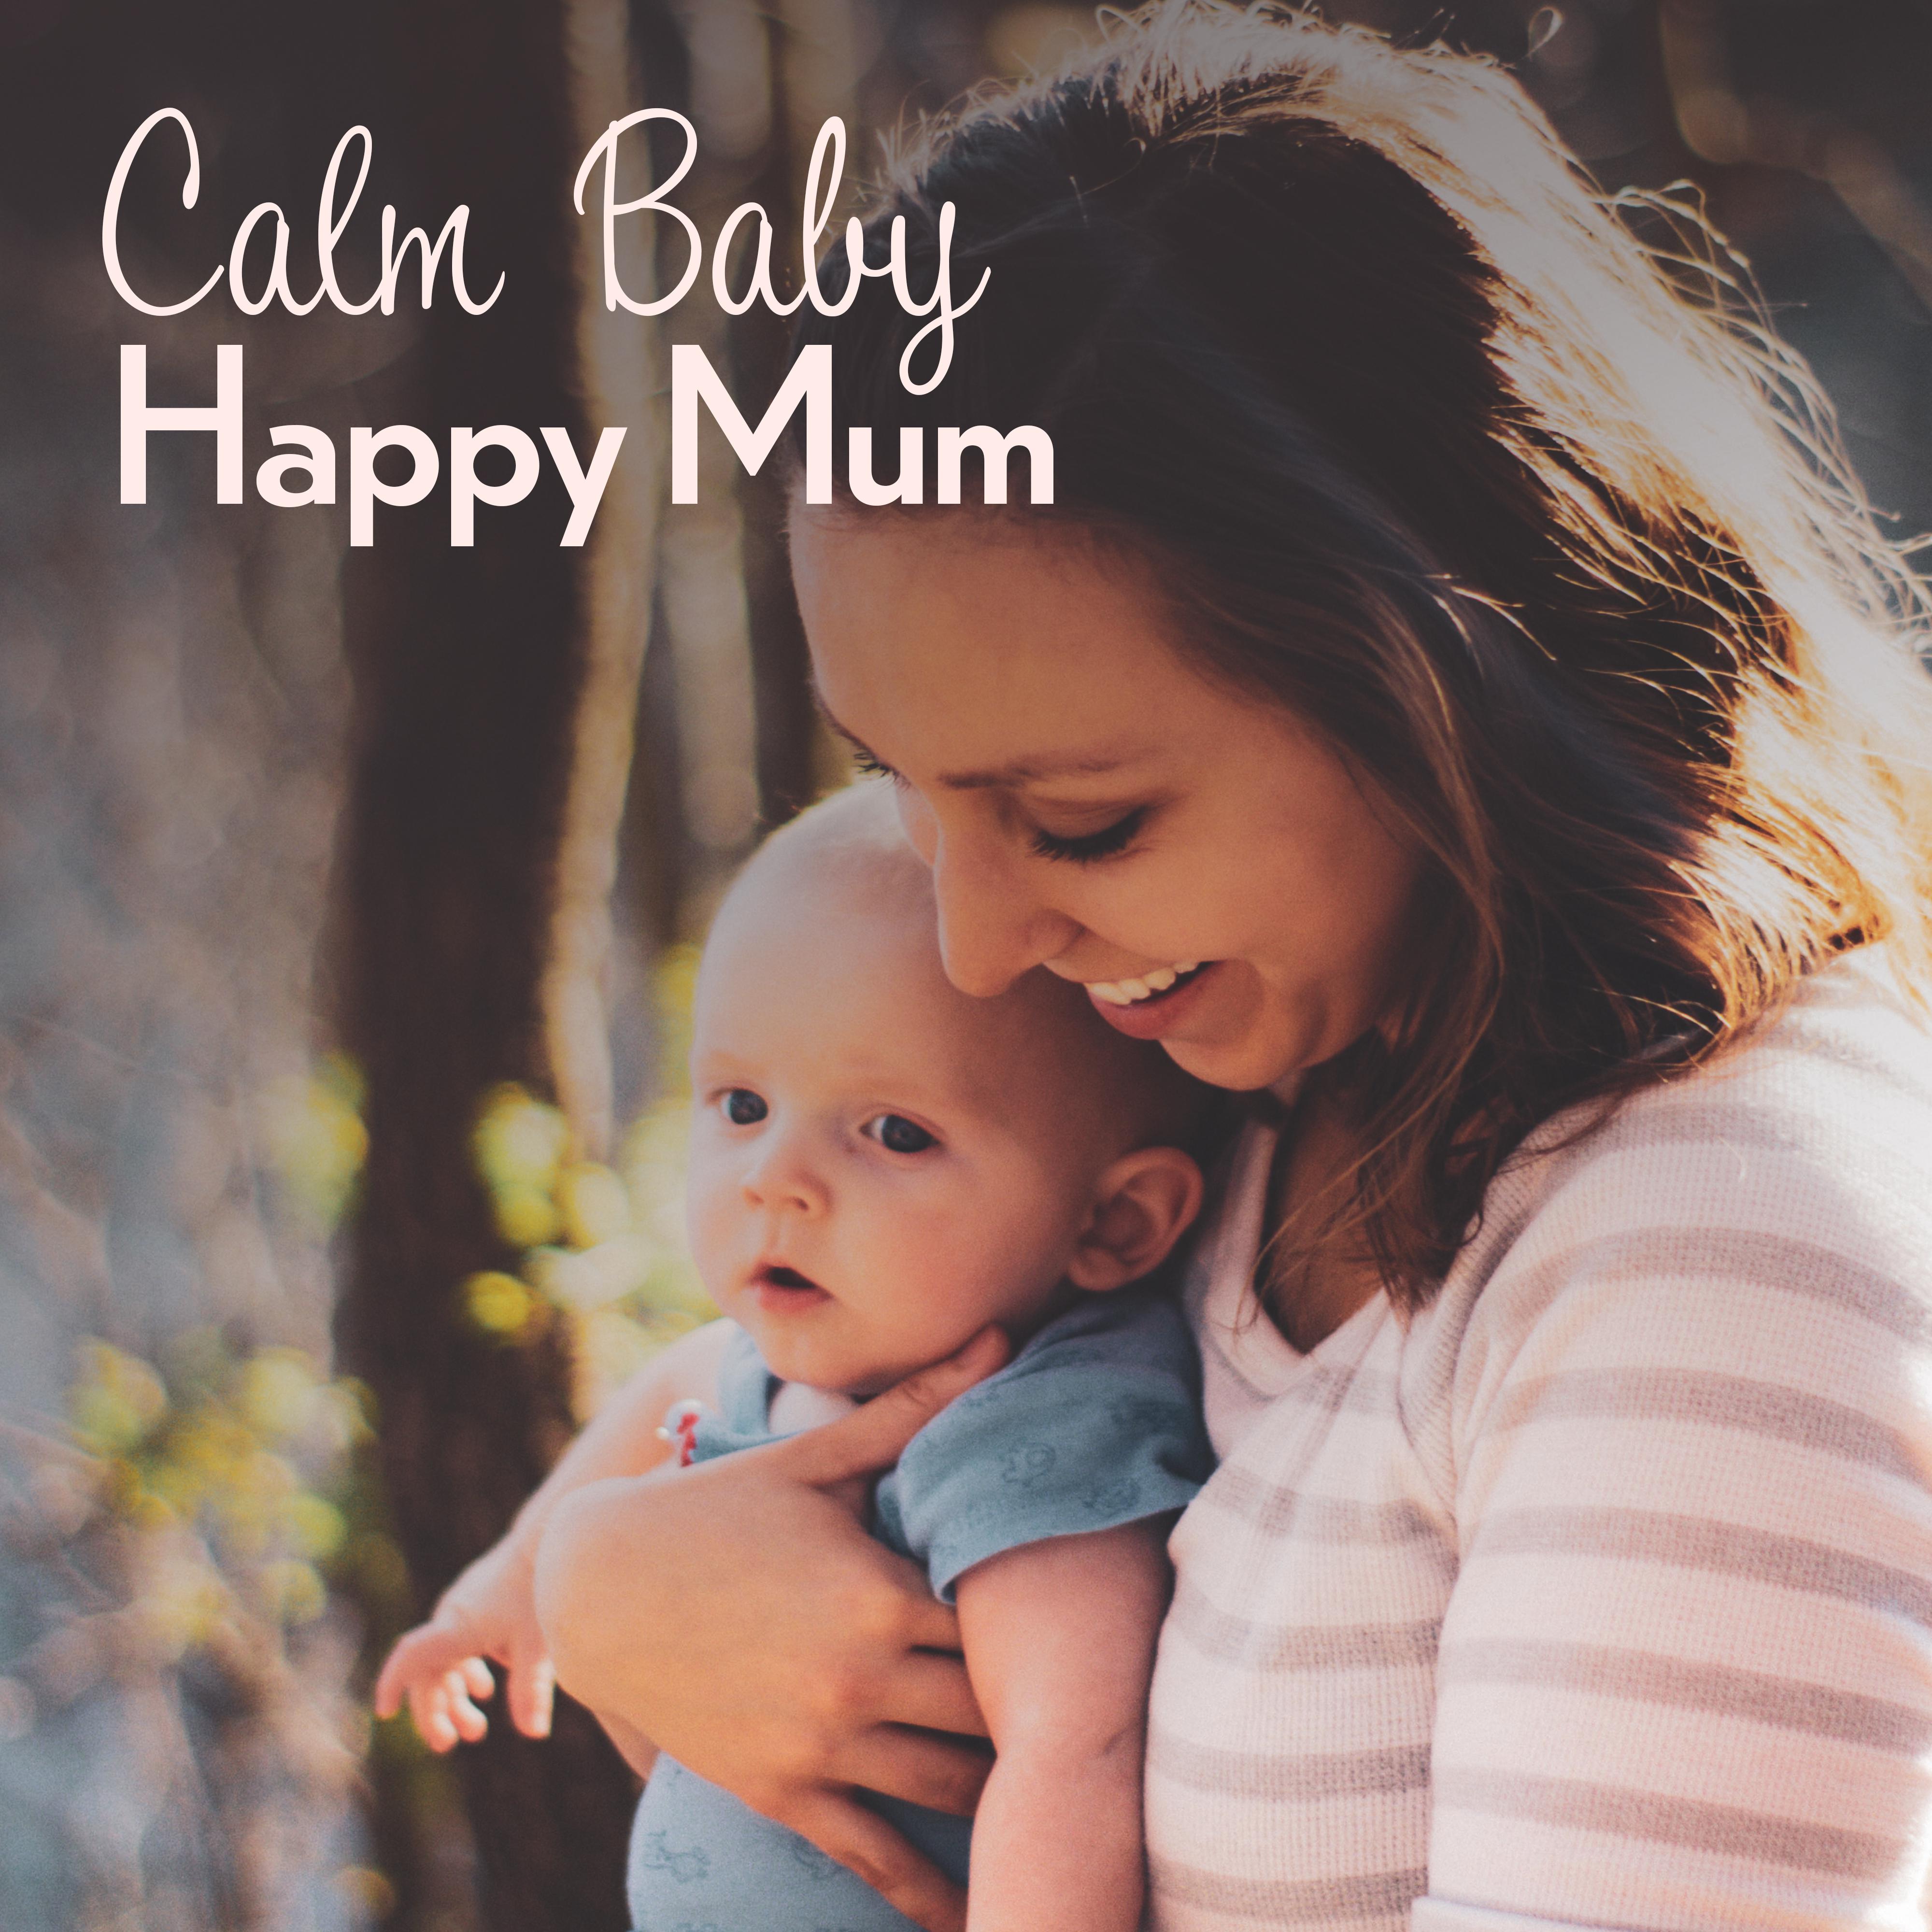 Calm Baby, Happy Mum: 15 Soothing New Age Songs for Good Baby & Mum Relax & Sleep